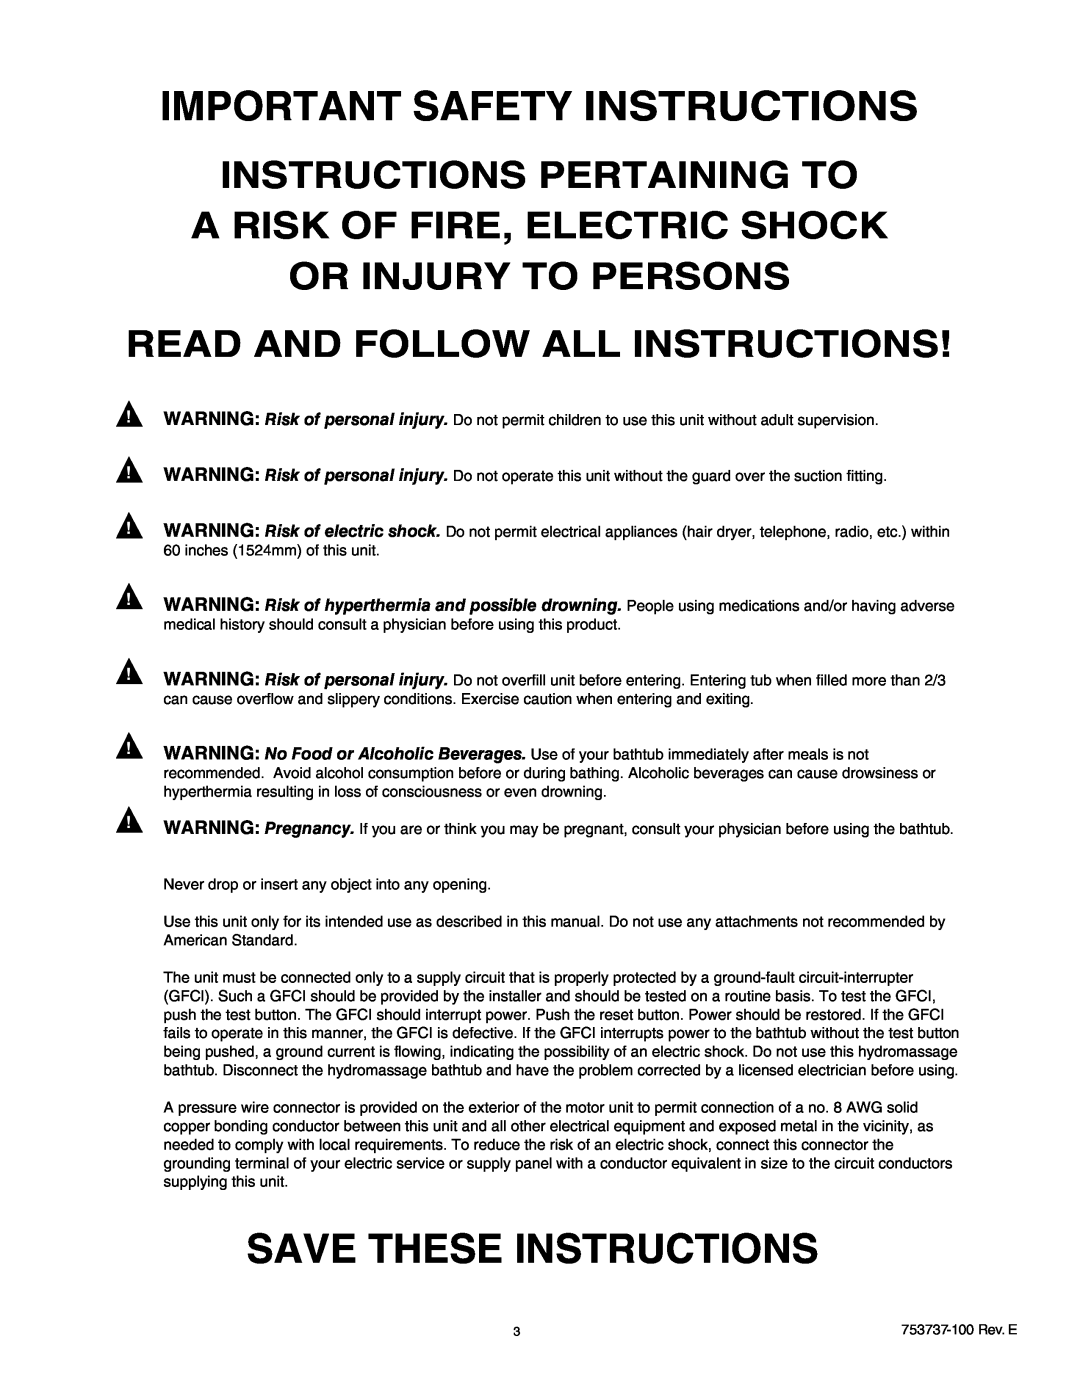 American Standard 2908L, 2774L Important Safety Instructions, Save These Instructions, Read And Follow All Instructions 